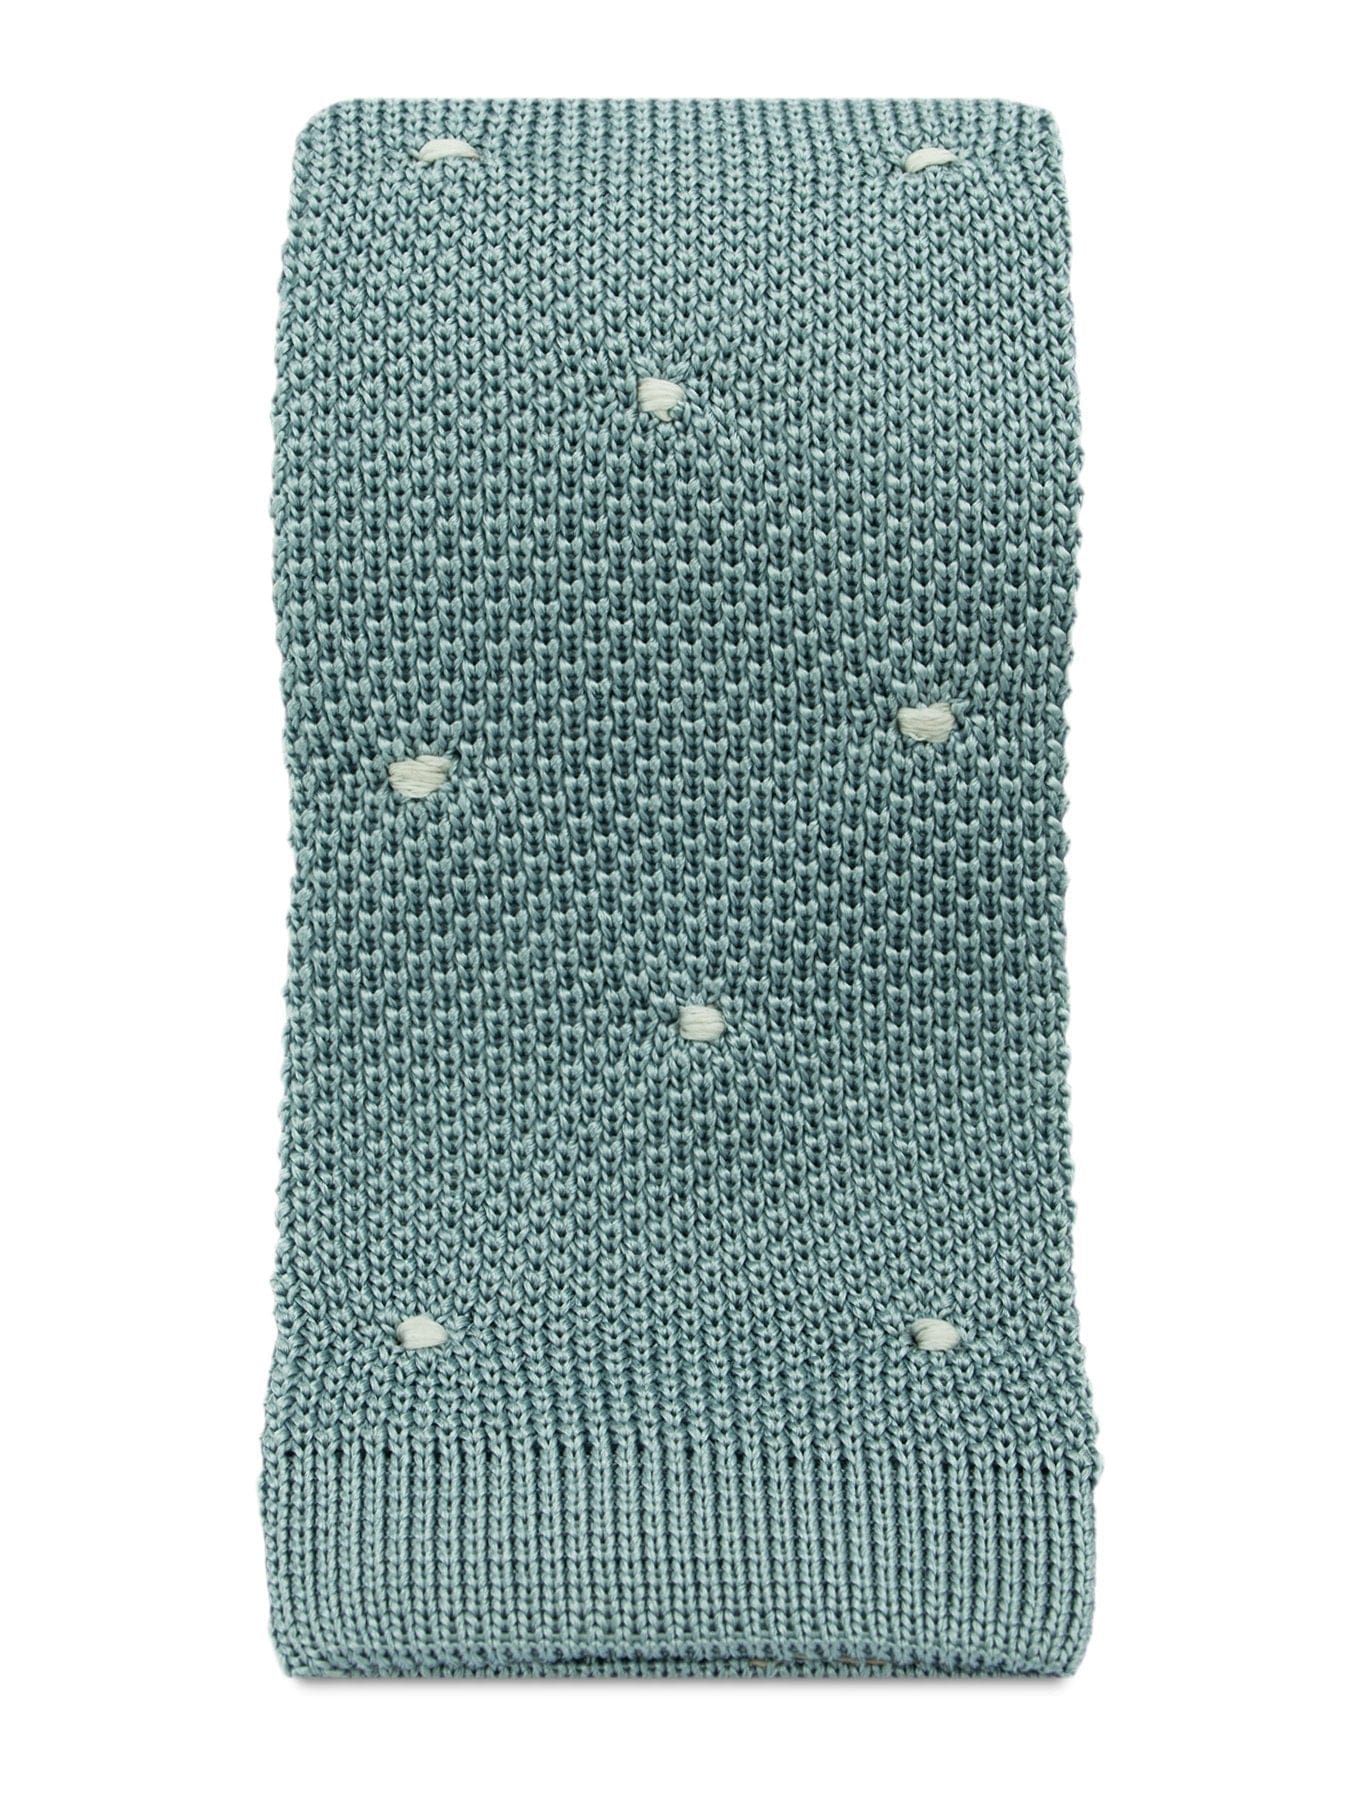 Dusky Blue Knitted Silk Tie with White Spots